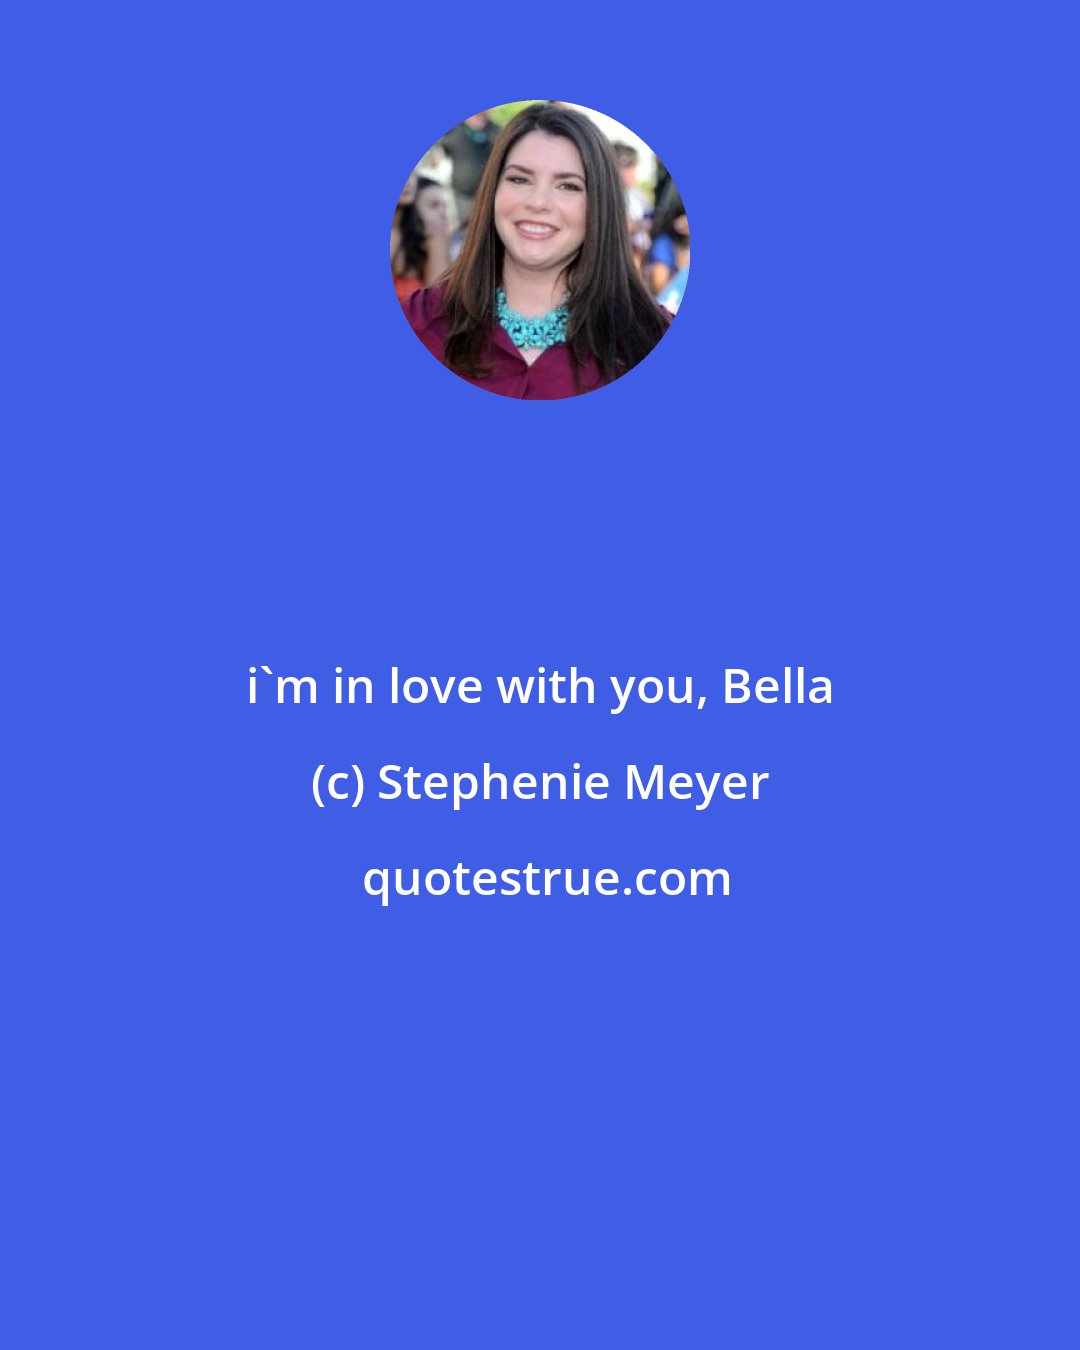 Stephenie Meyer: i'm in love with you, Bella